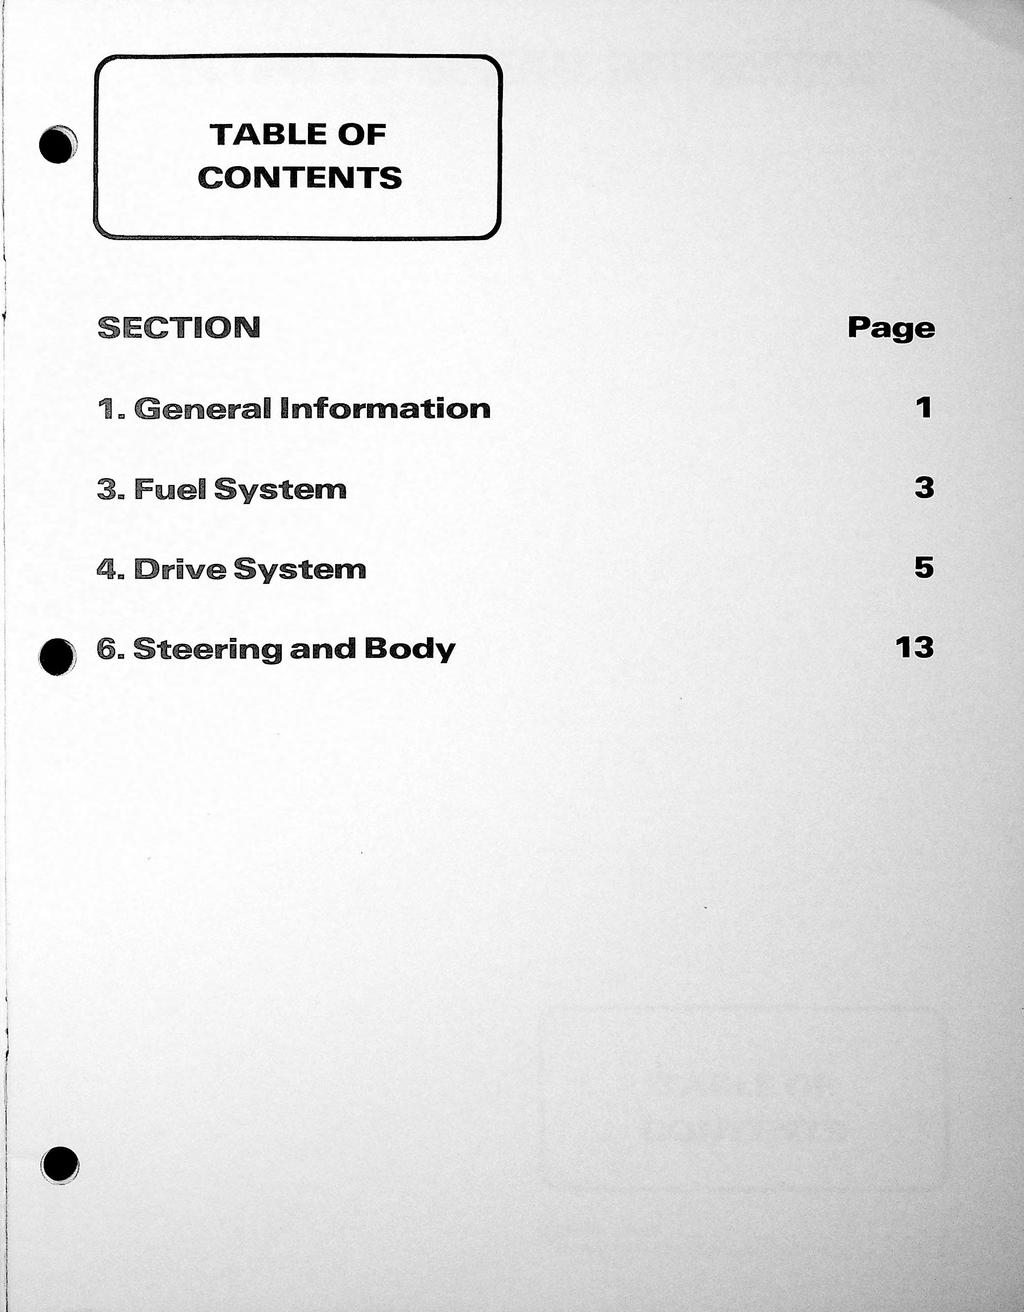 f i i TABLE OF CONTENTS 1 SECTON Page 1 m Genera nformation 3a Fue